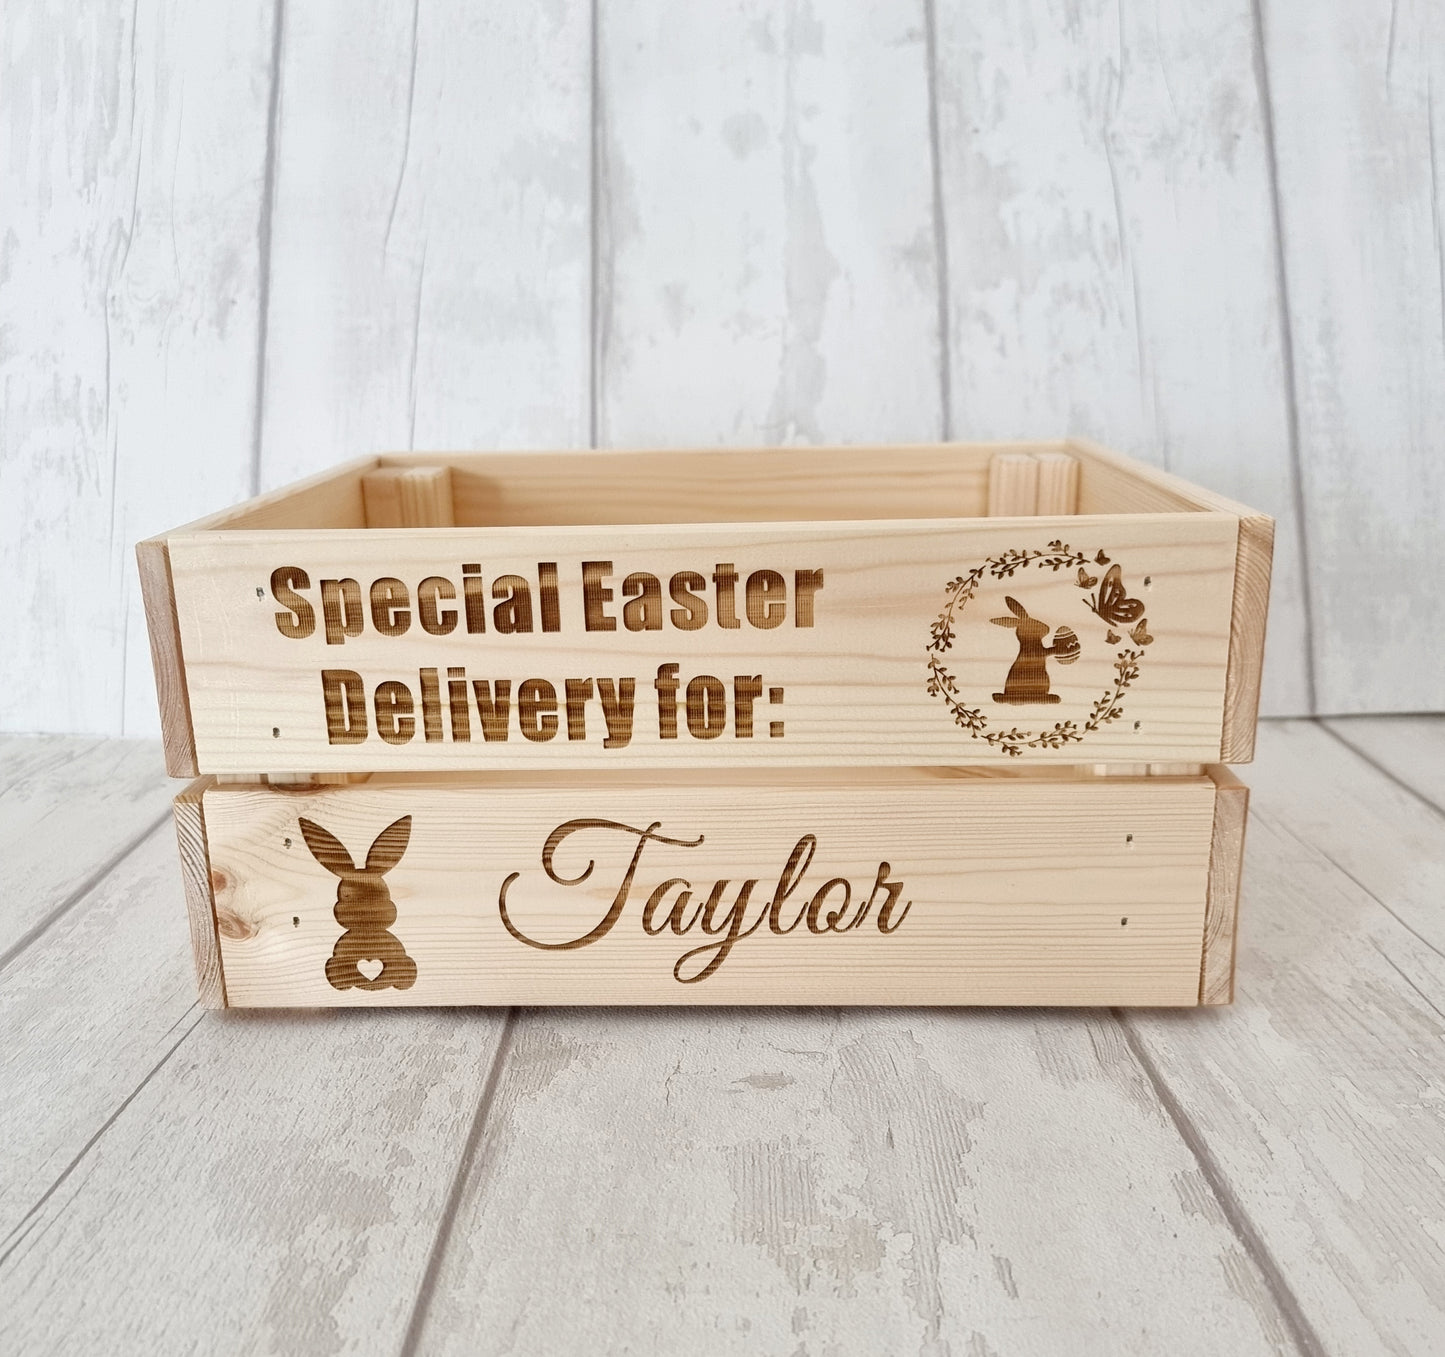 Personalised wooden Easter crate, treats.